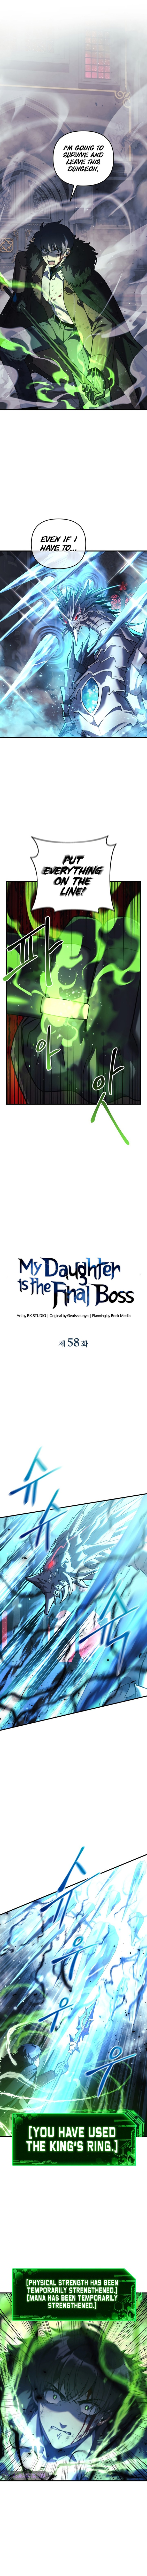 my_daughter_is_the_final_boss_58_1